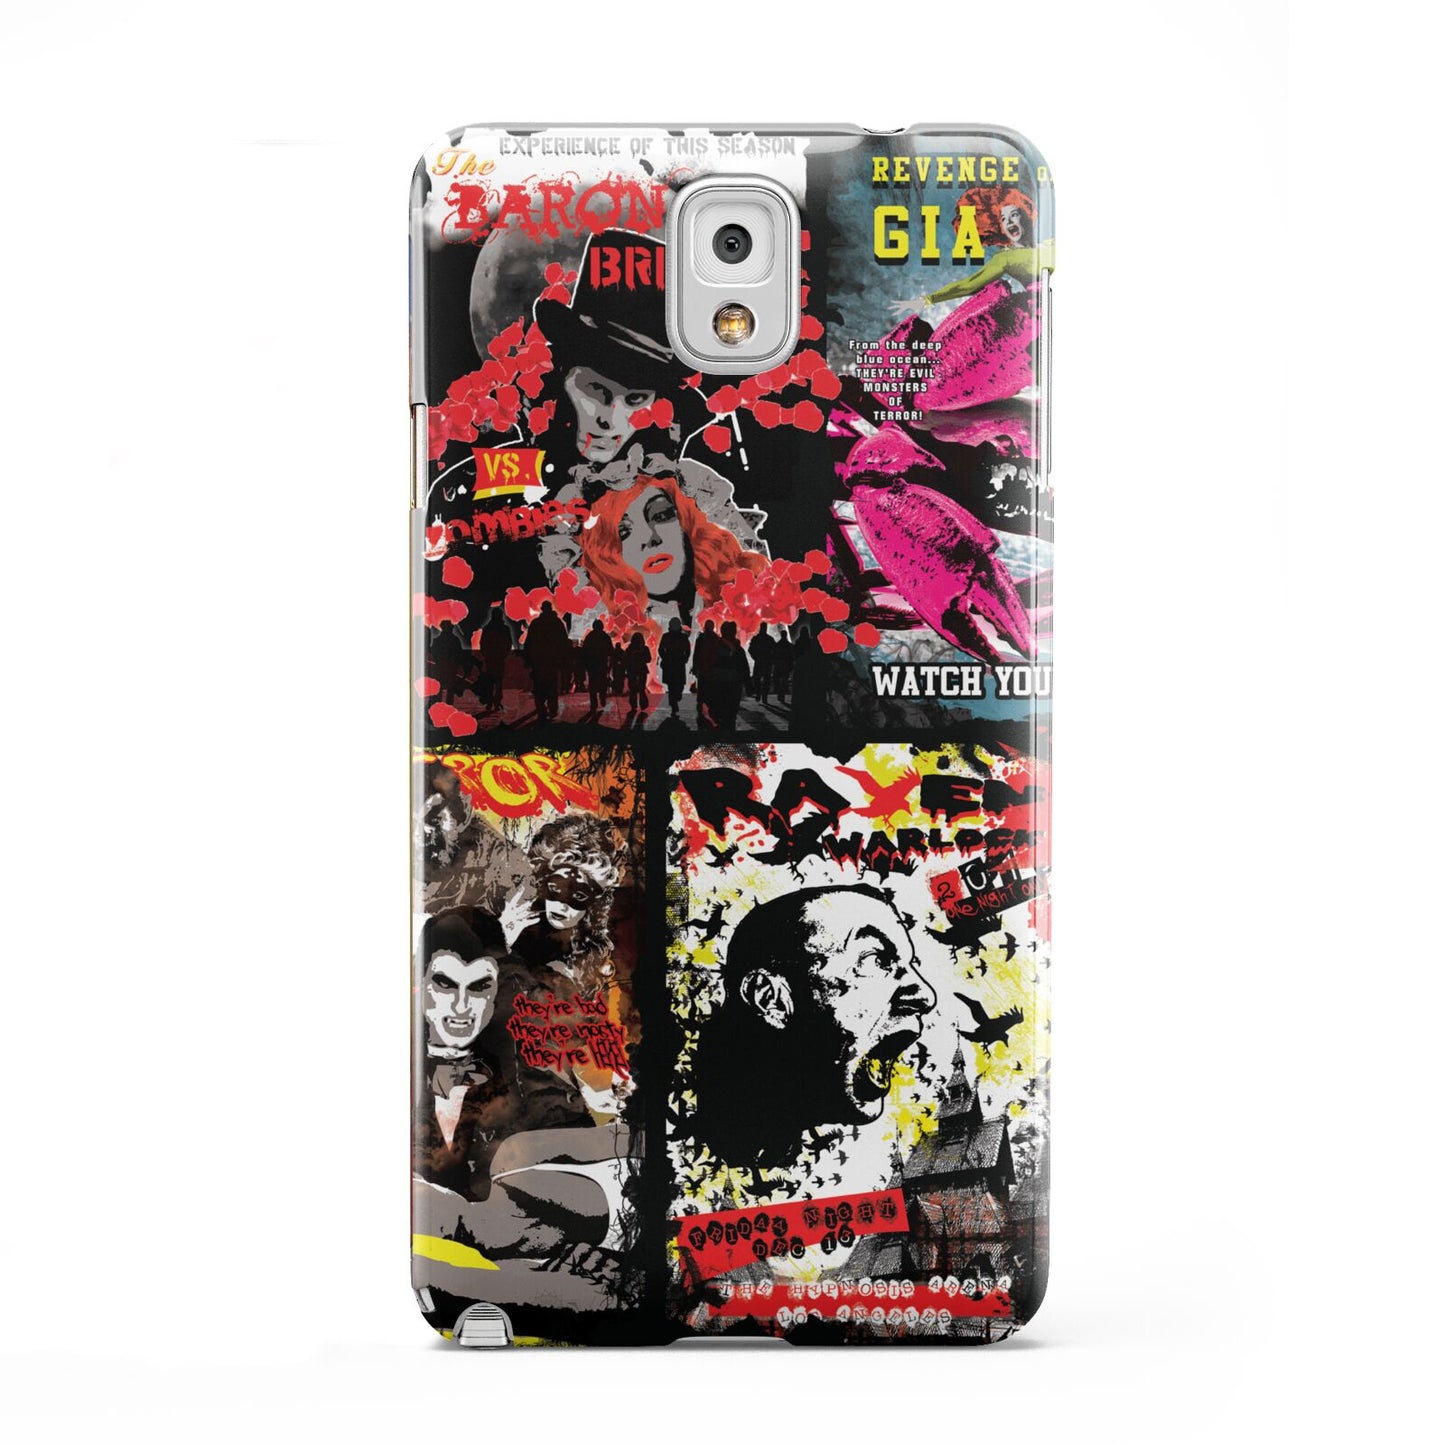 B Movie Posters Samsung Galaxy Note 3 Case